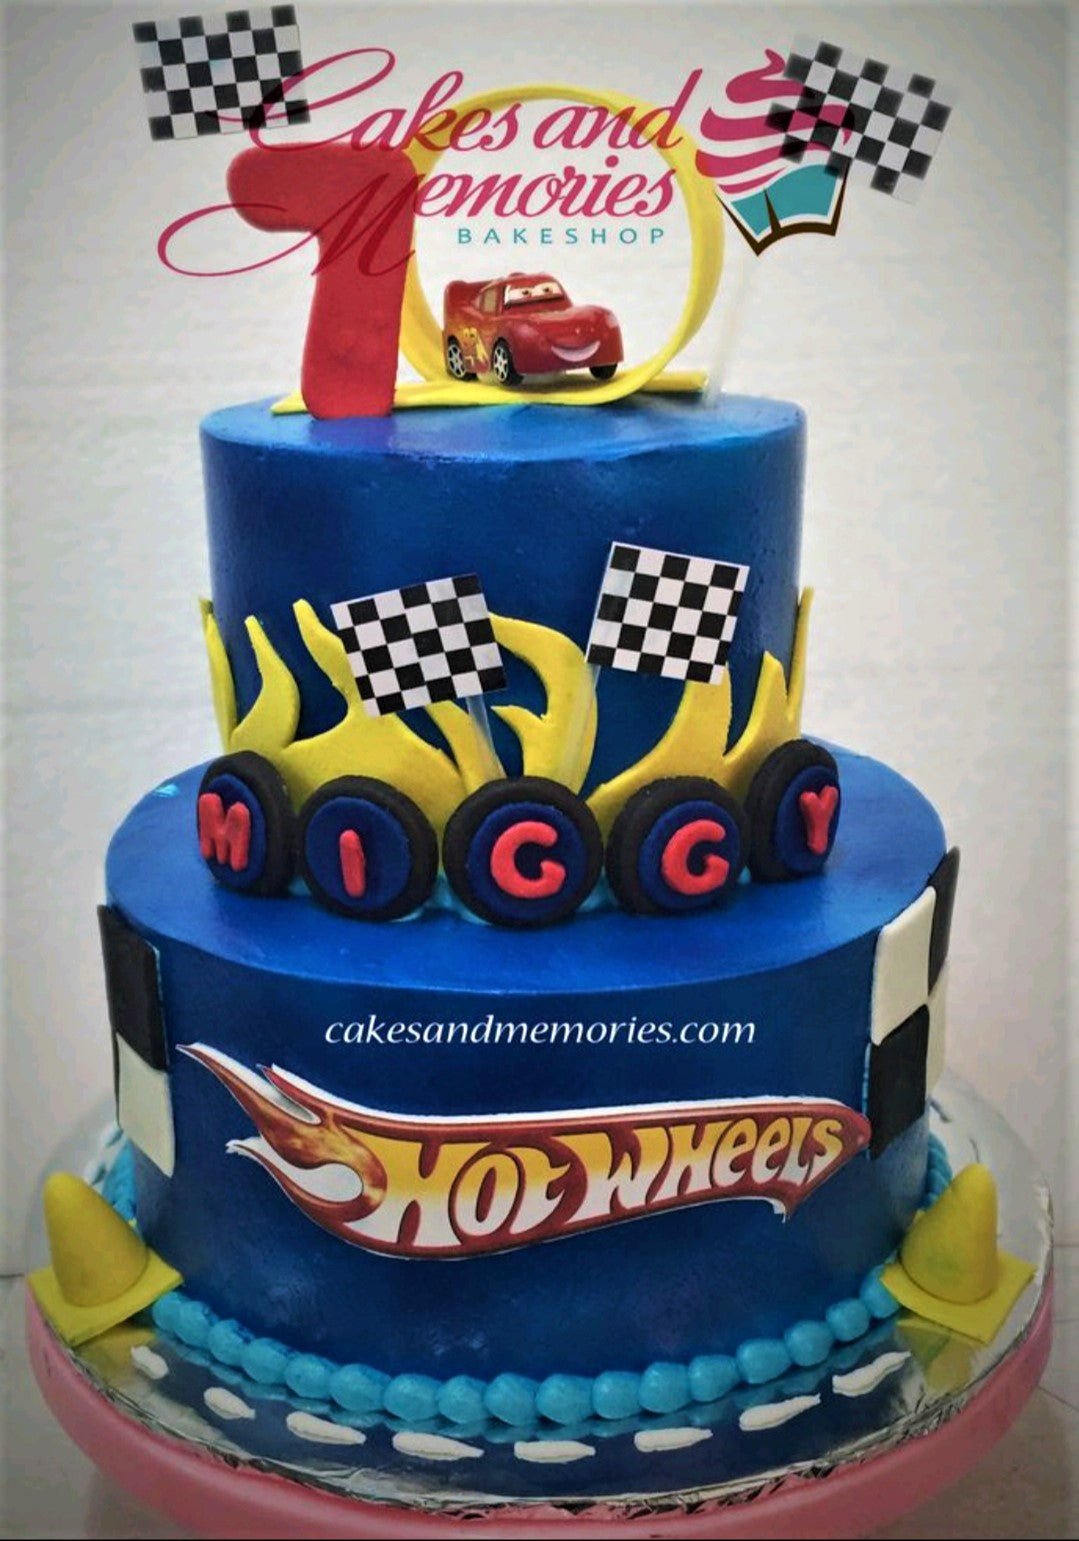 DECOPAC Decoset Hot Wheels Drift Birthday Cake Decorations, 2-Piece Topper  With Race Car & 3D Racetrack Plaque, Create Action-Packed Racing Cakes For  Birthdays & Parties : Amazon.in: Toys & Games